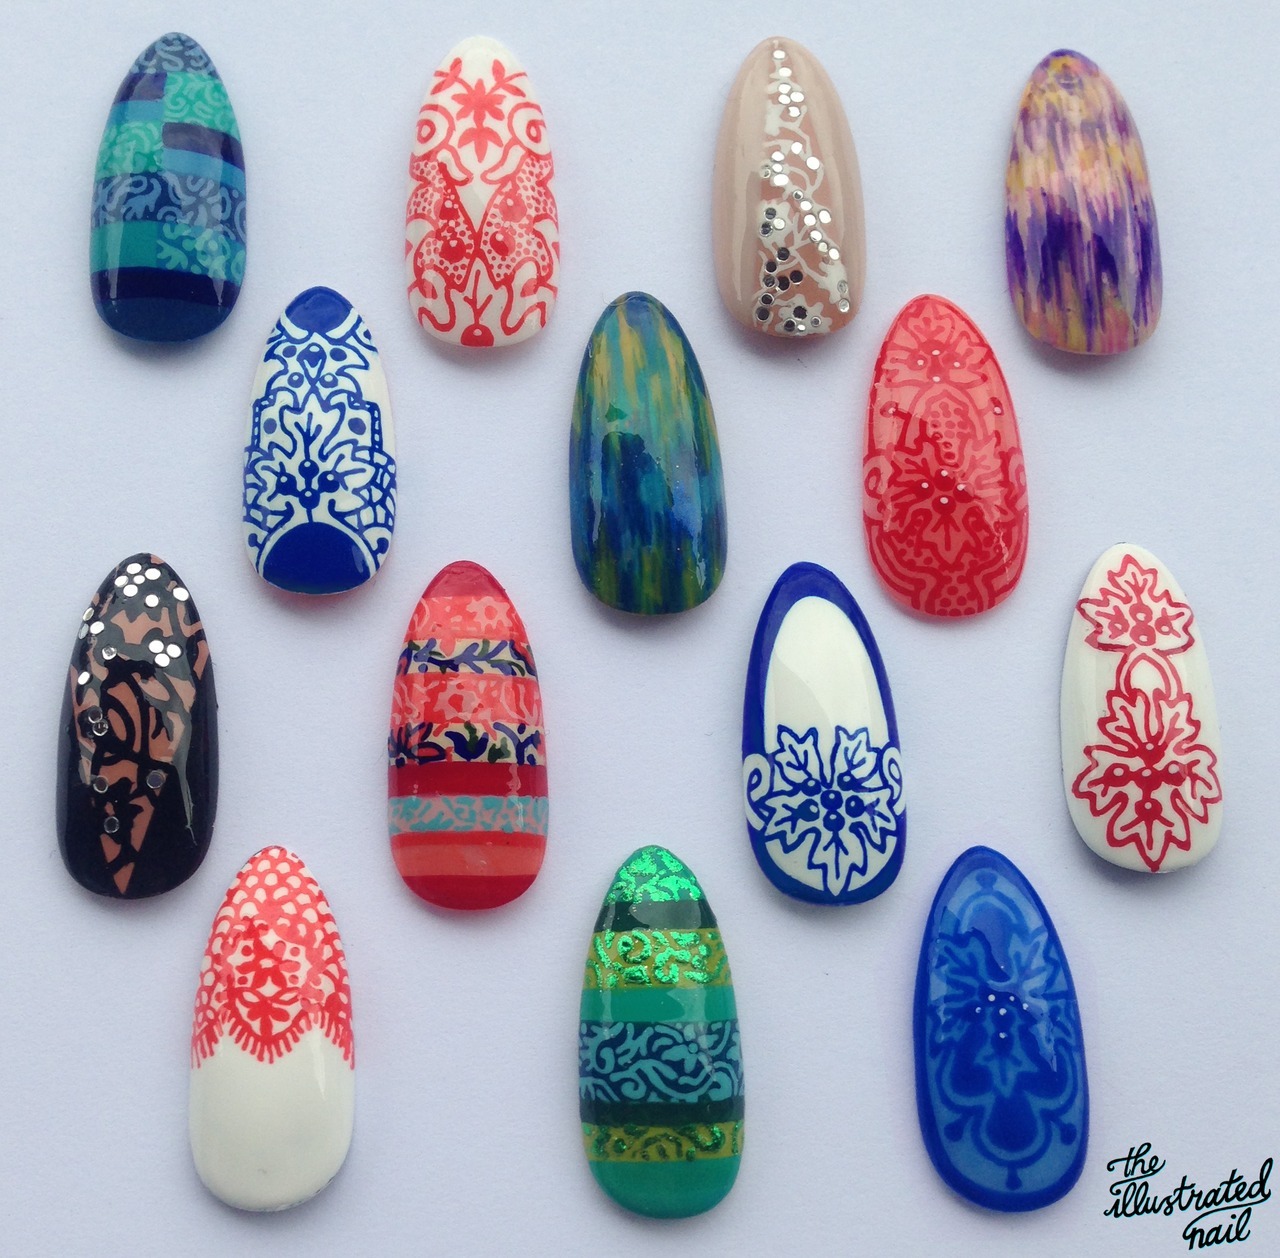 theillustratednail:
“My entry for the Tadashi Shoji Nail Art Challenge…
Please vote for me by clicking the link below…
https://www.facebook.com/tadashishoji/app_427357767312145?_=_
”
Tadashi Shoji Nail Art Challenge by the Illustrated Nail